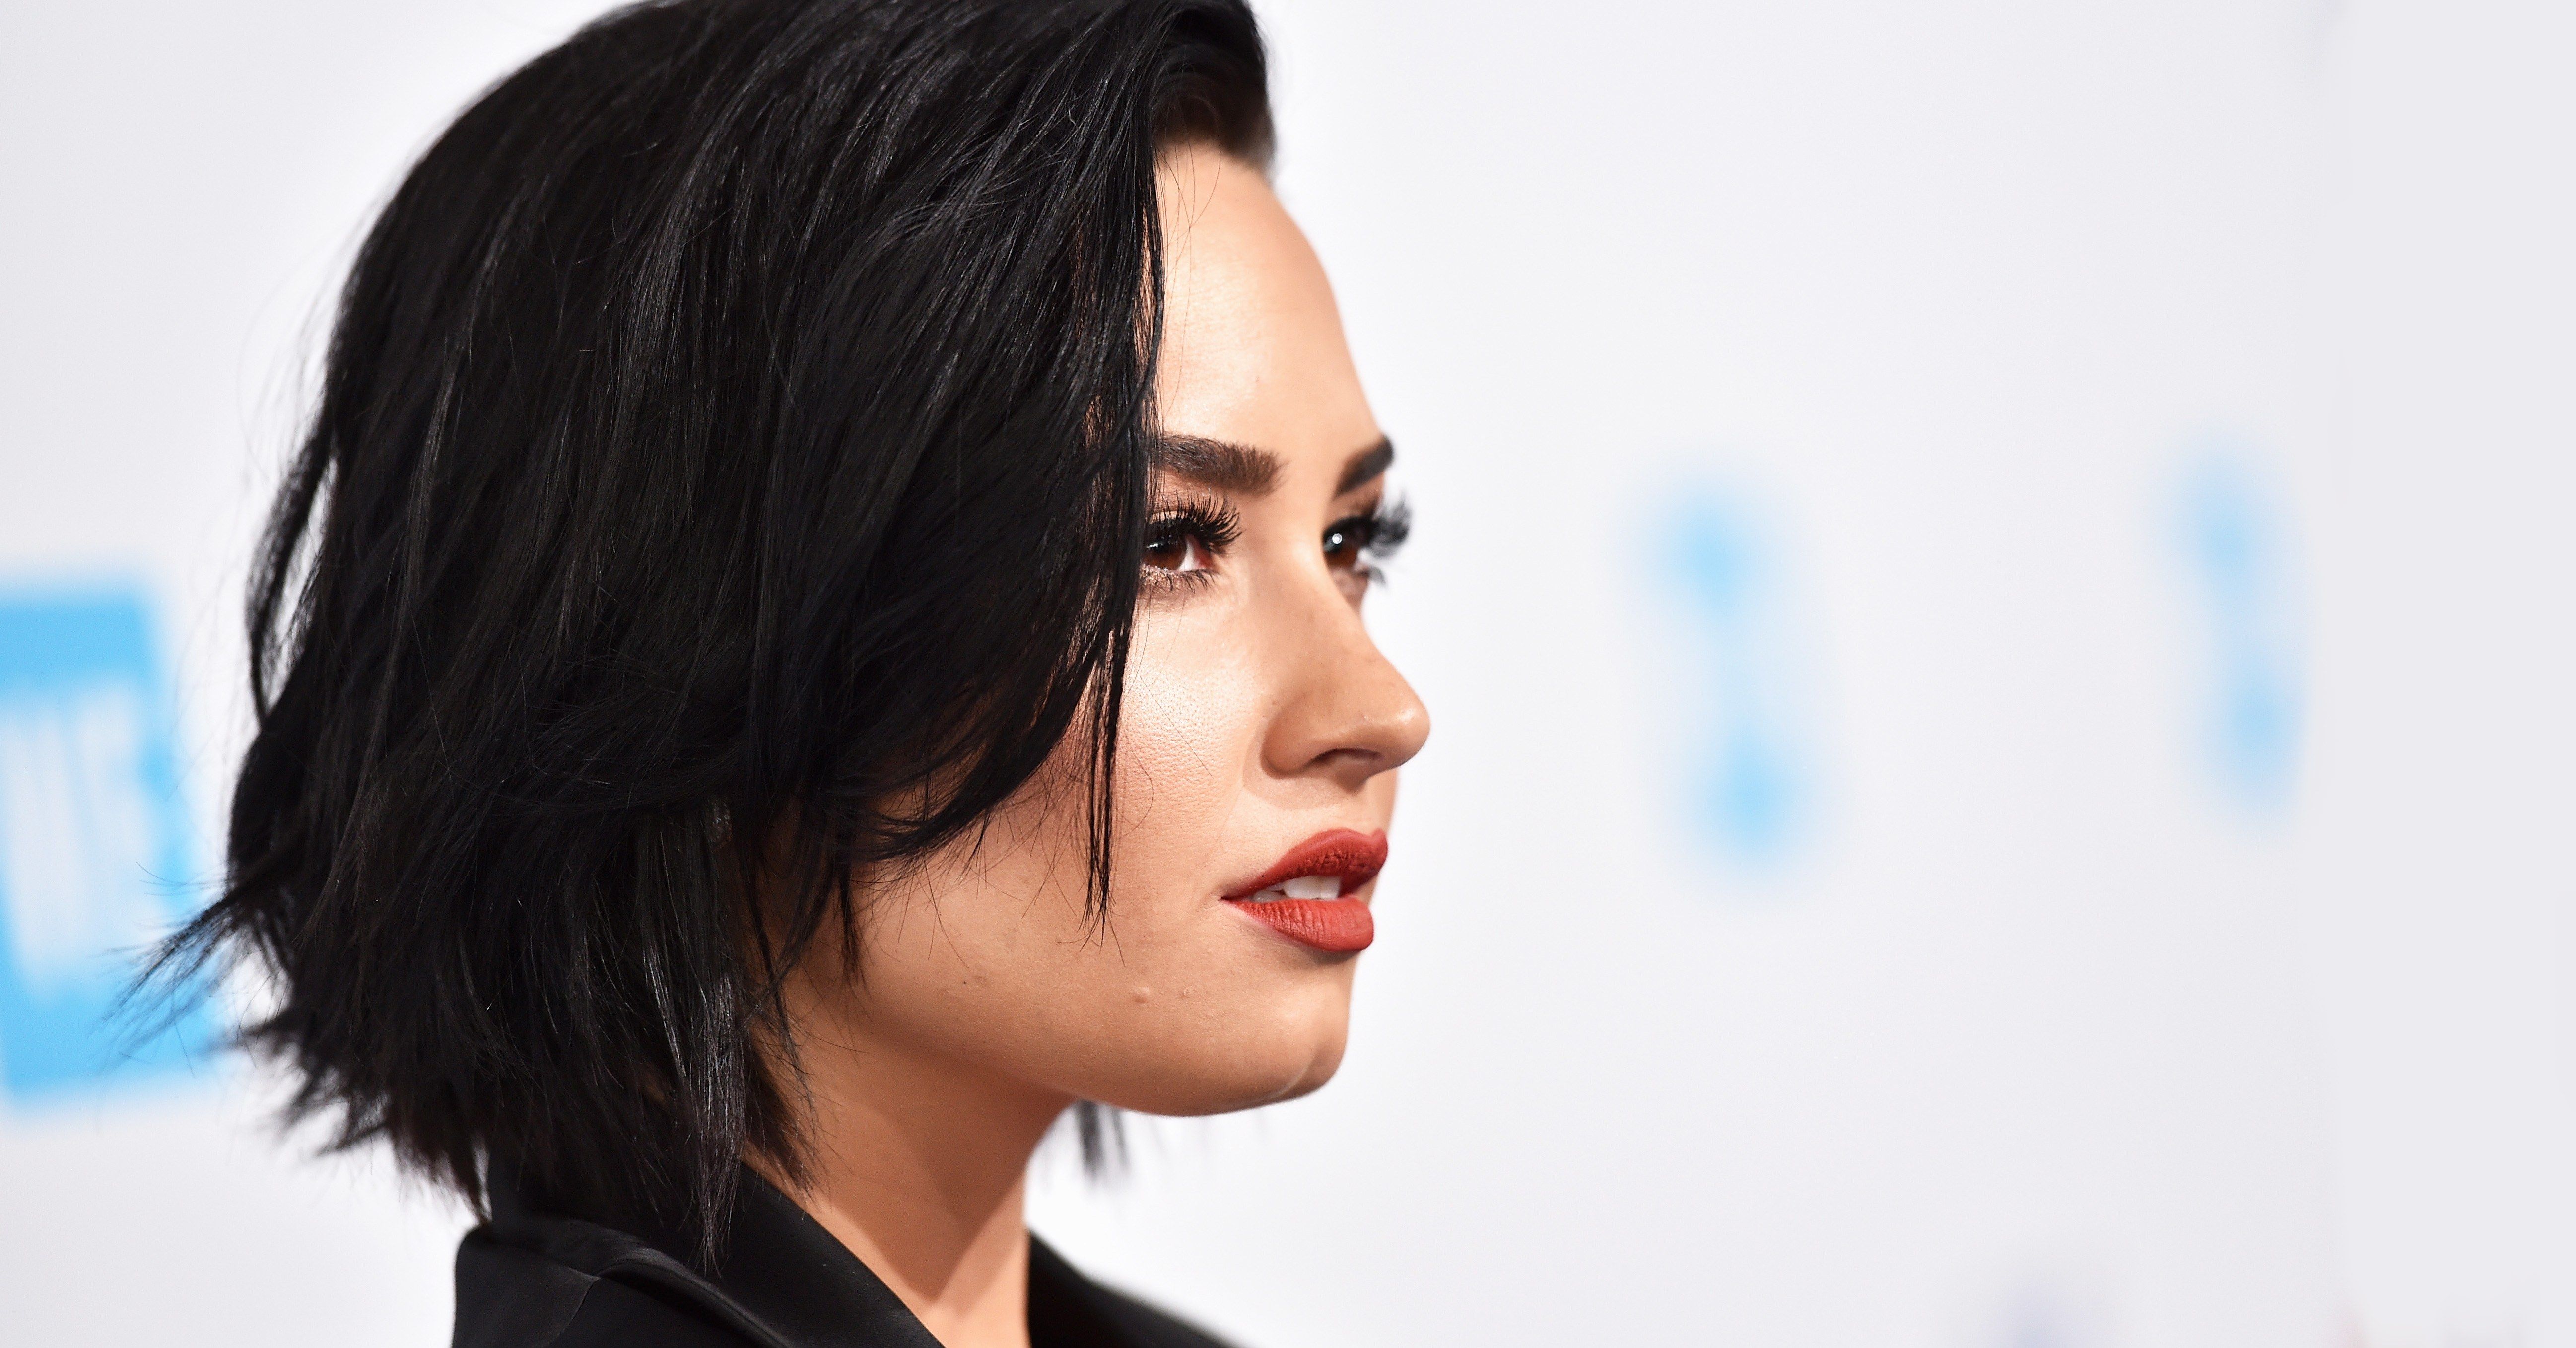 Demi Lovato Looks Incredible With Her New Ombré Hair